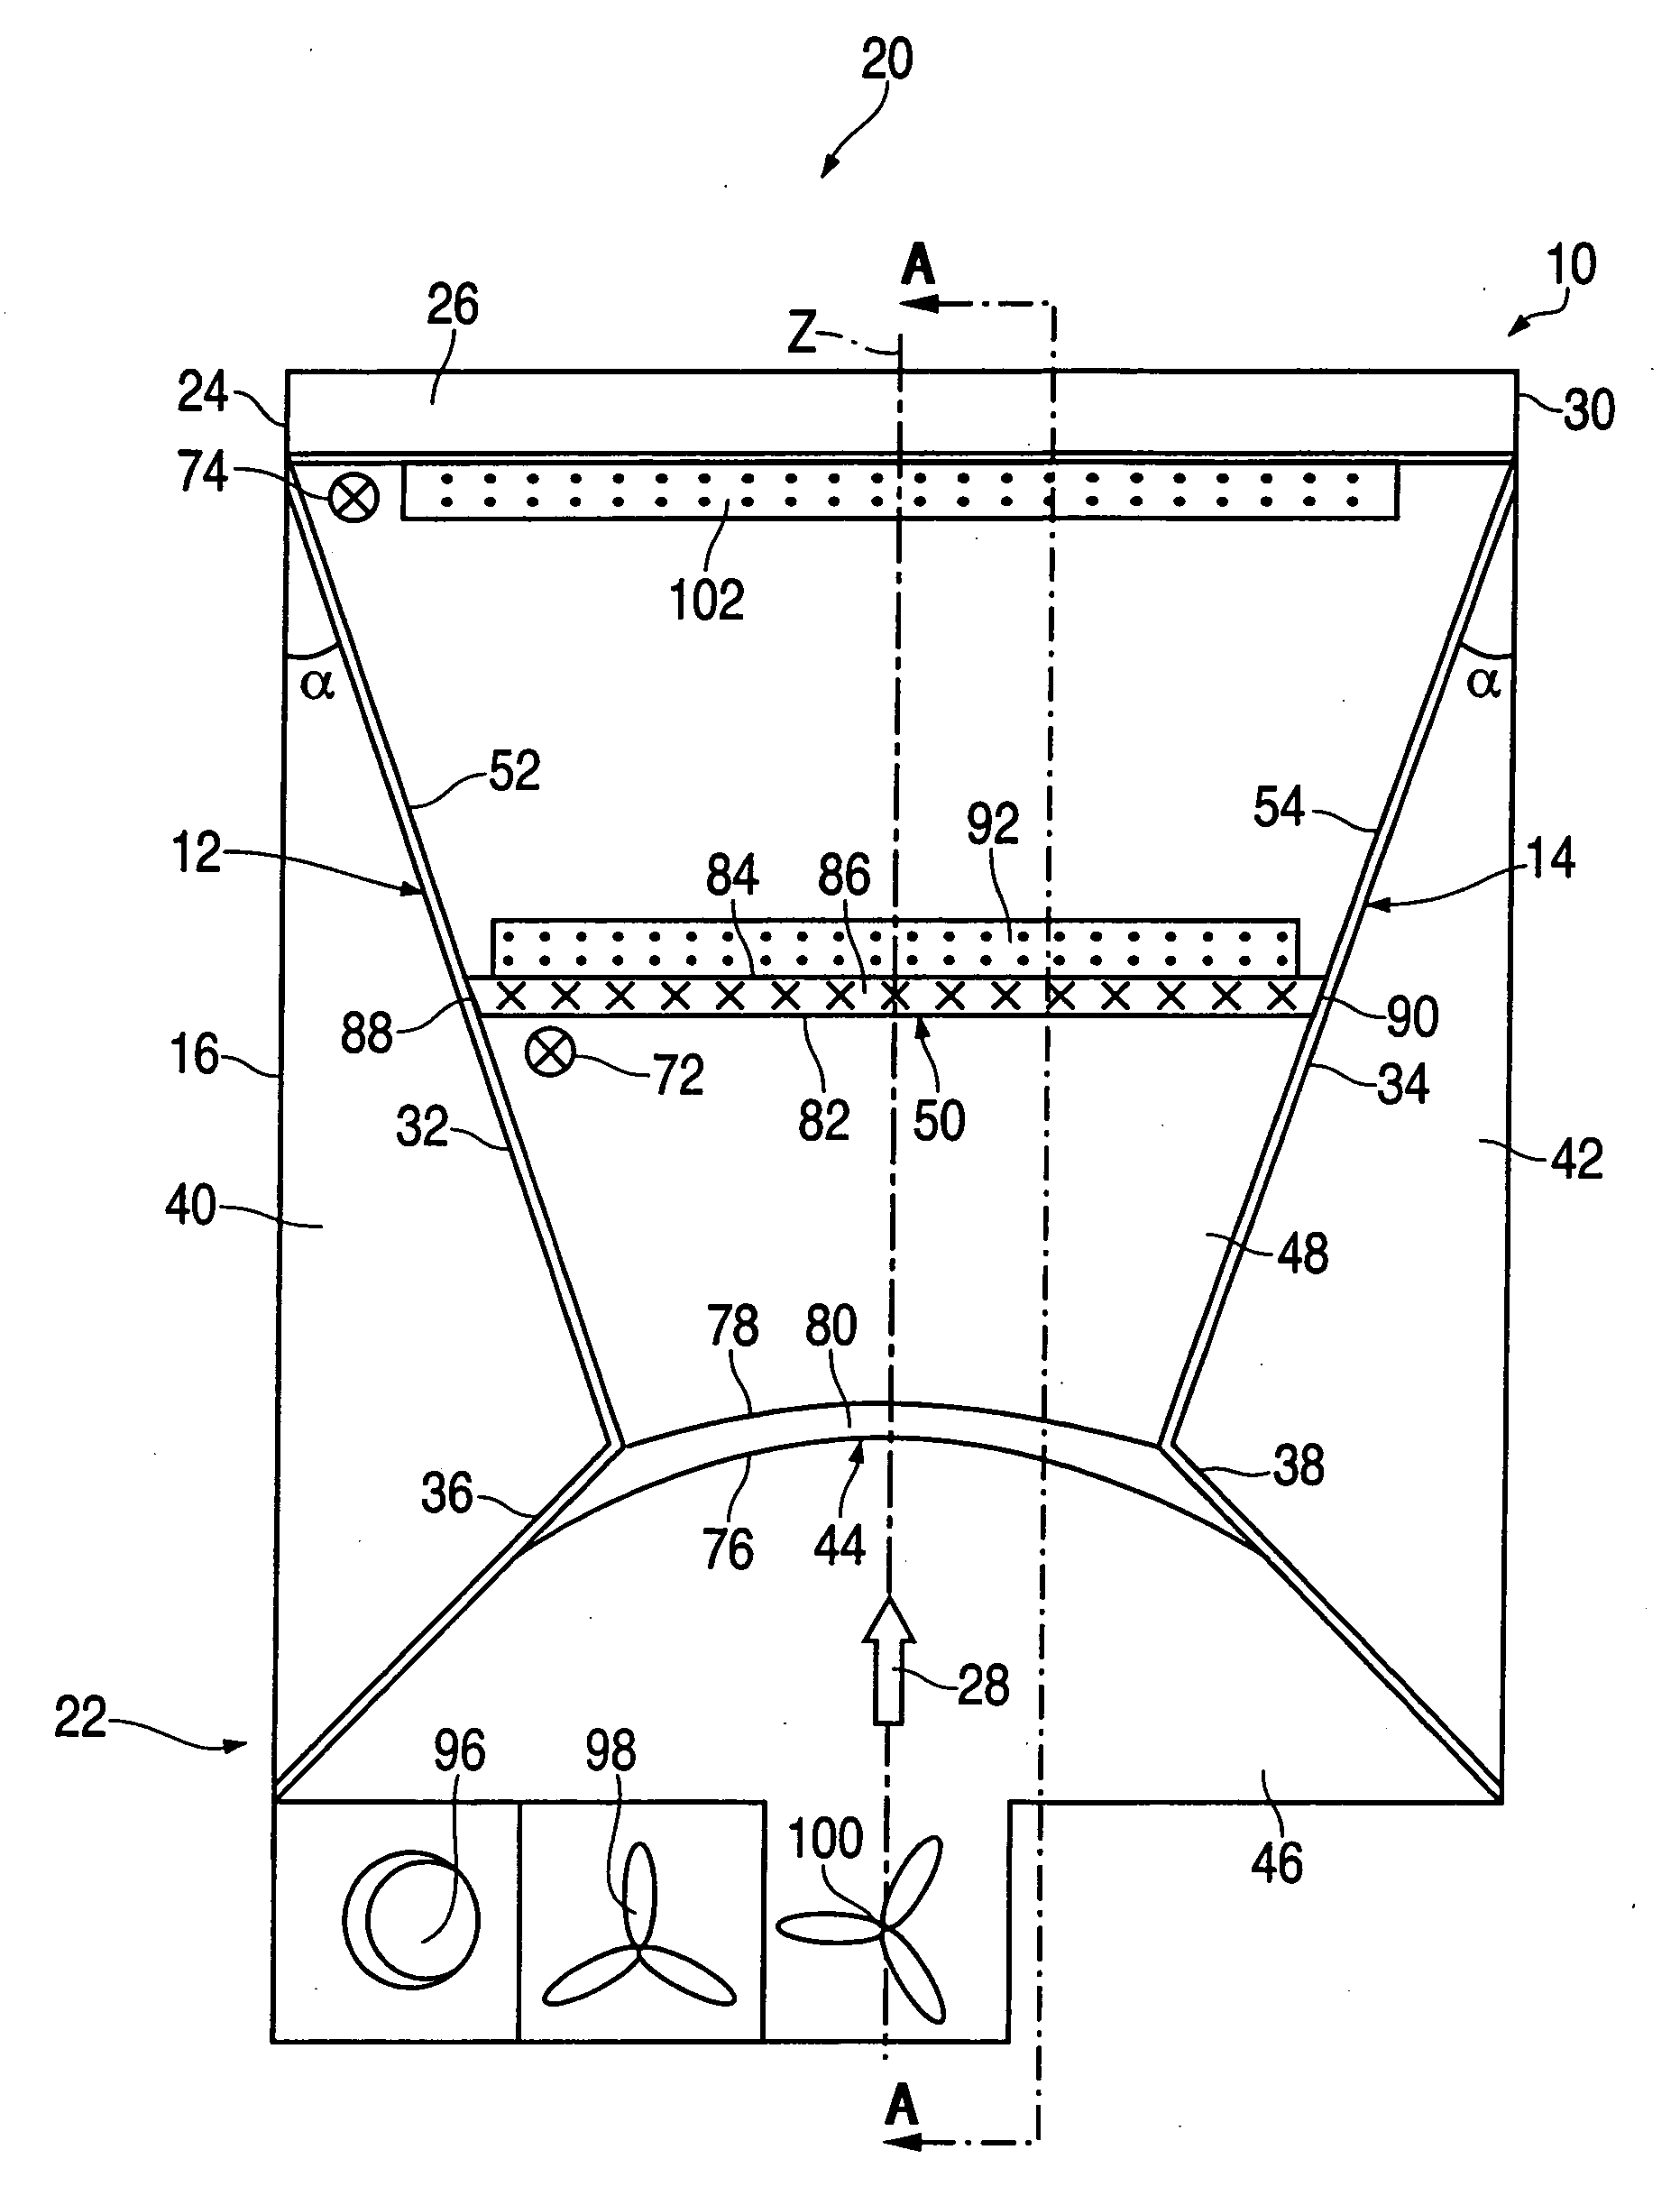 Cylindrical mixer-settler apparatus and method